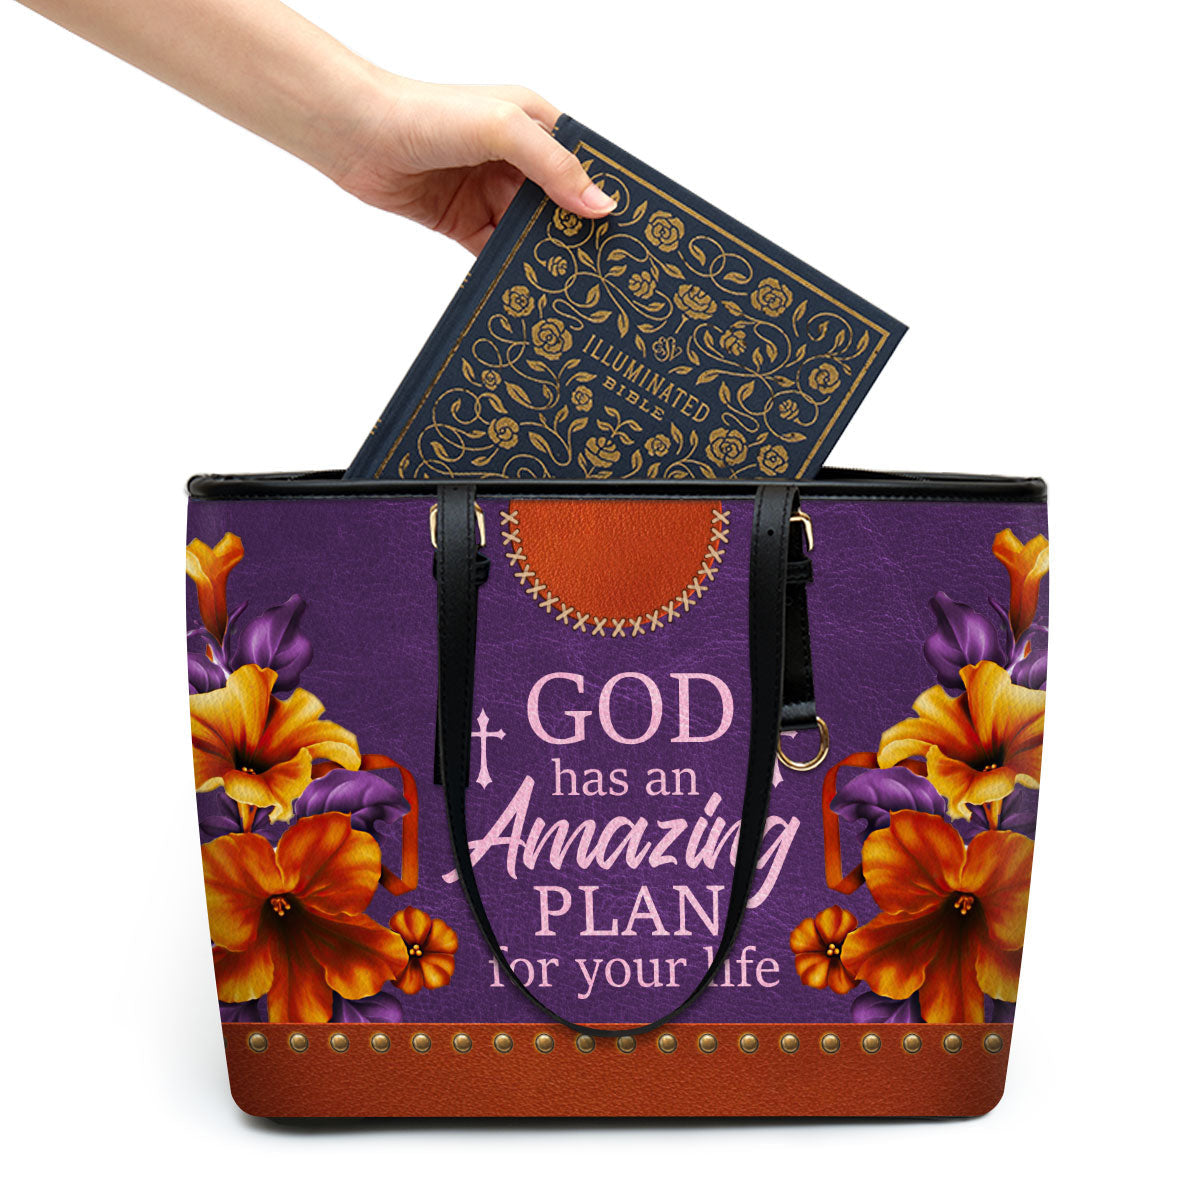 God Has An Amazing Plan For Your Life Large Leather Tote Bag Lily And Cross - Christ Gifts For Religious Women - Best Mother's Day Gifts